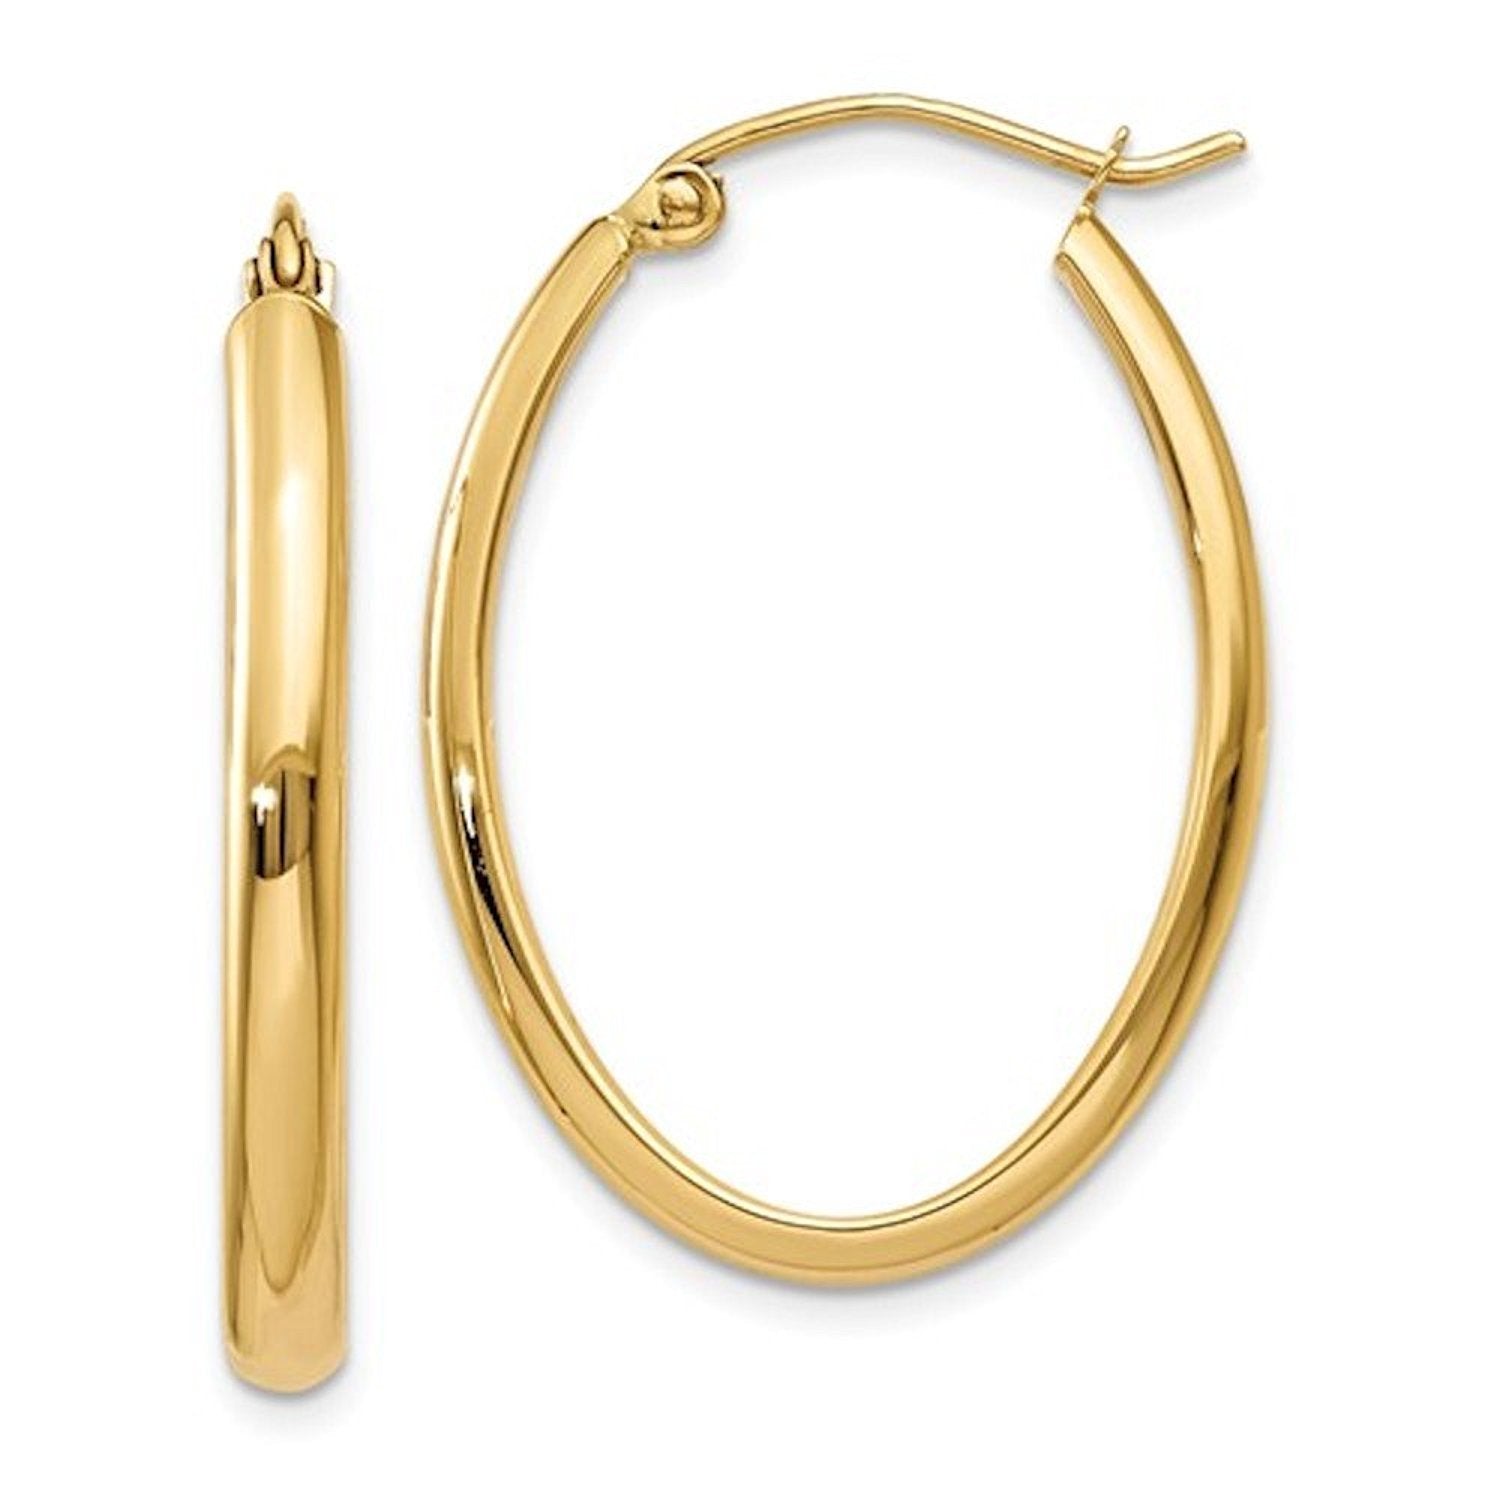 14k Yellow Gold Classic Polished Oval Hoop Earrings 29mm x 21mm x 3mm